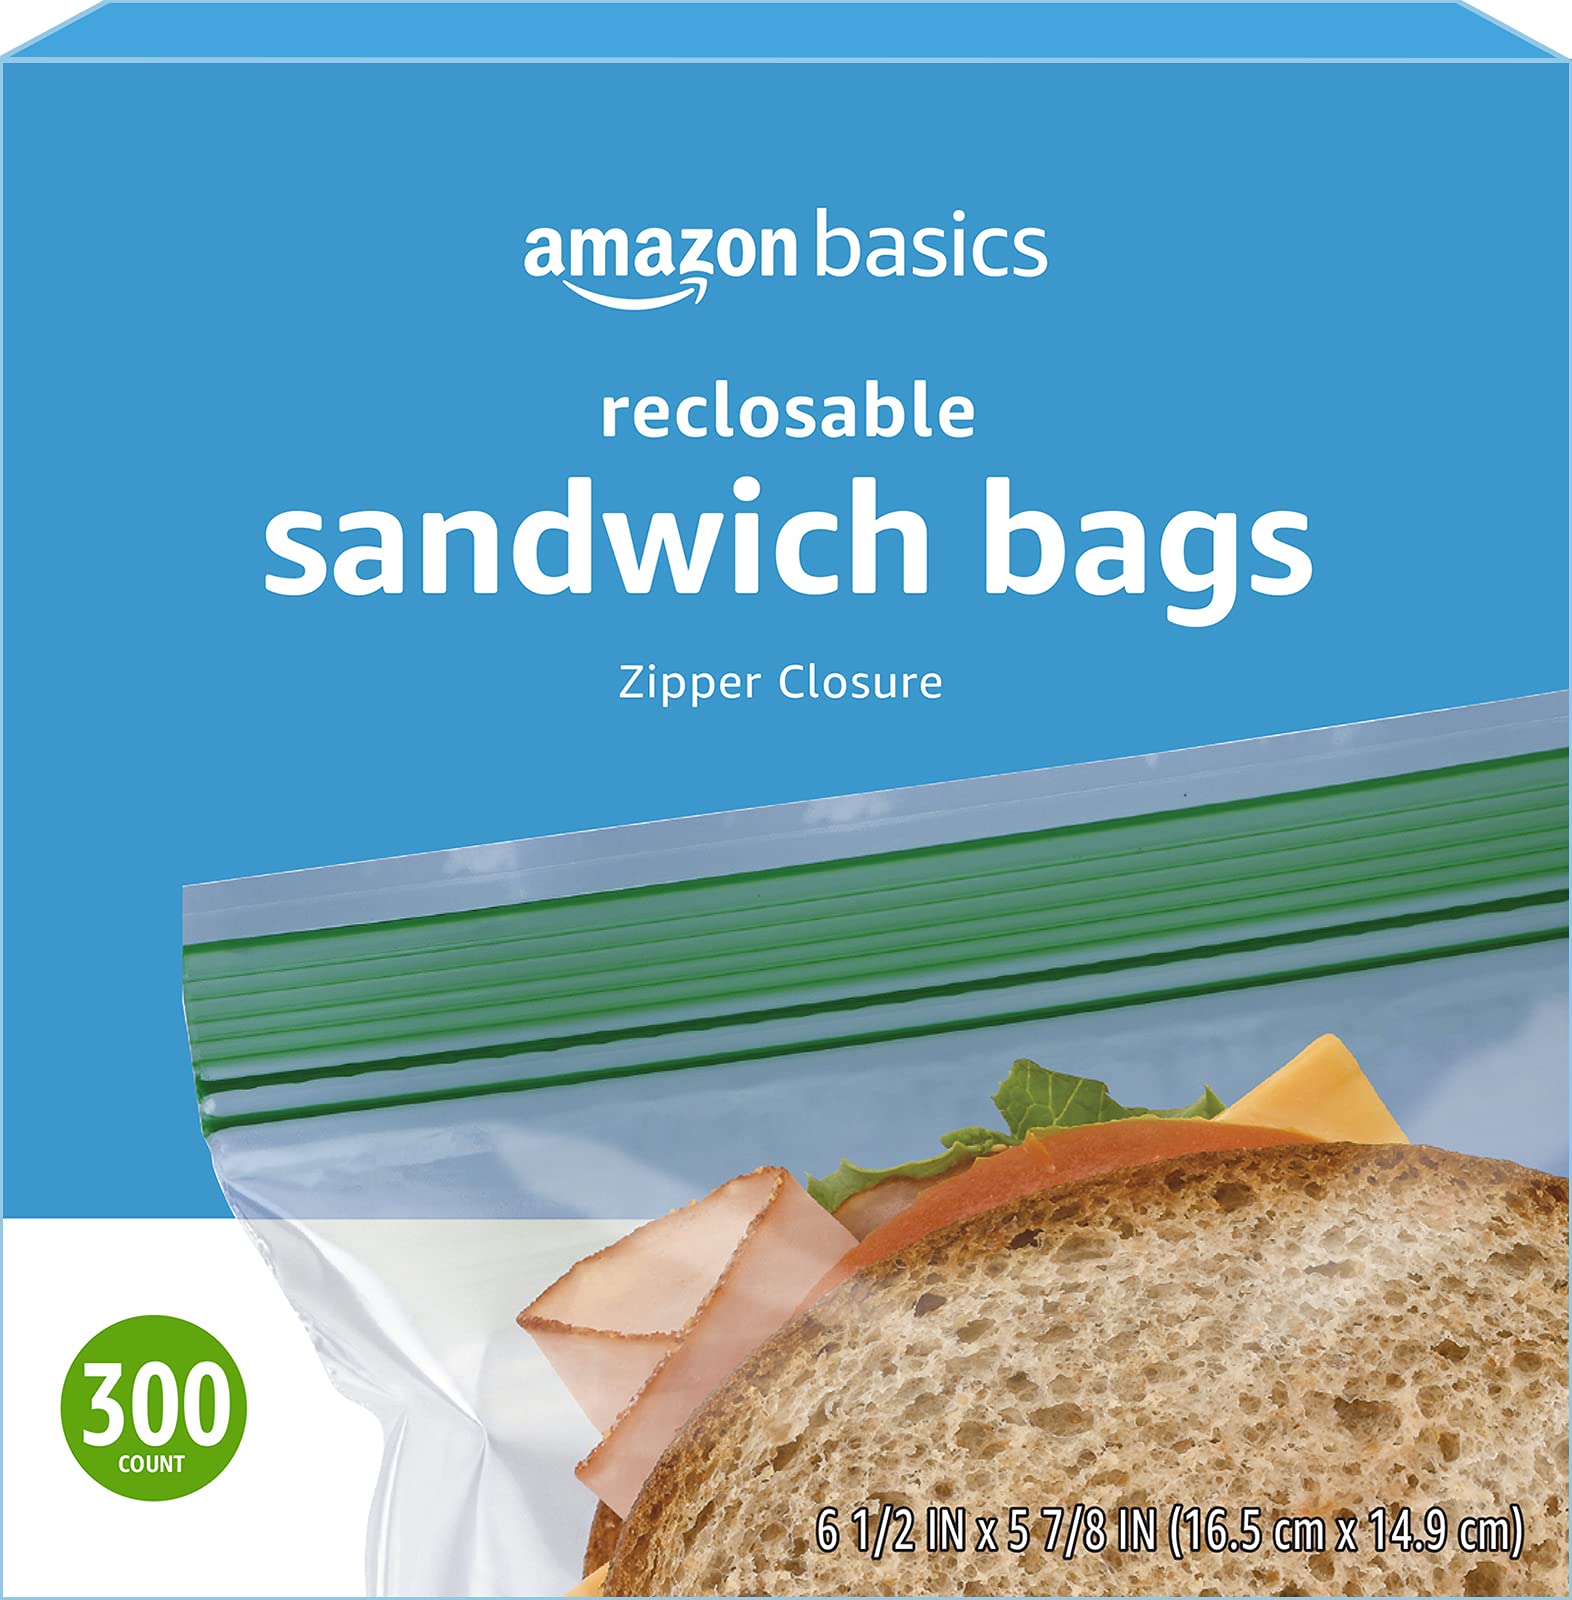 Amazon Basics Sandwich Storage Bags, 300 Count (Previously Solimo)